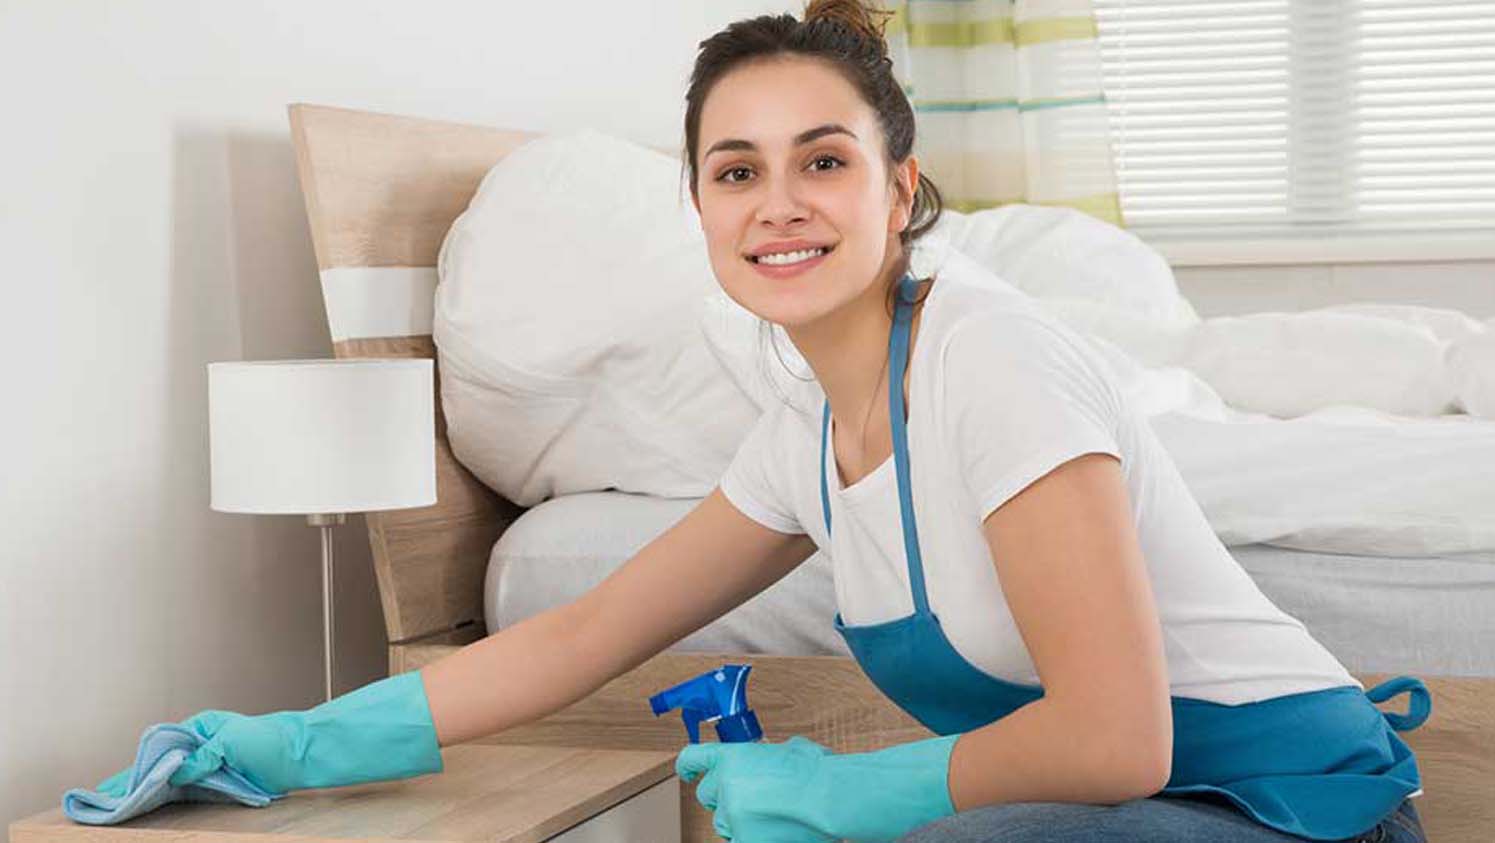 Rozis-Cleaning-Service-1